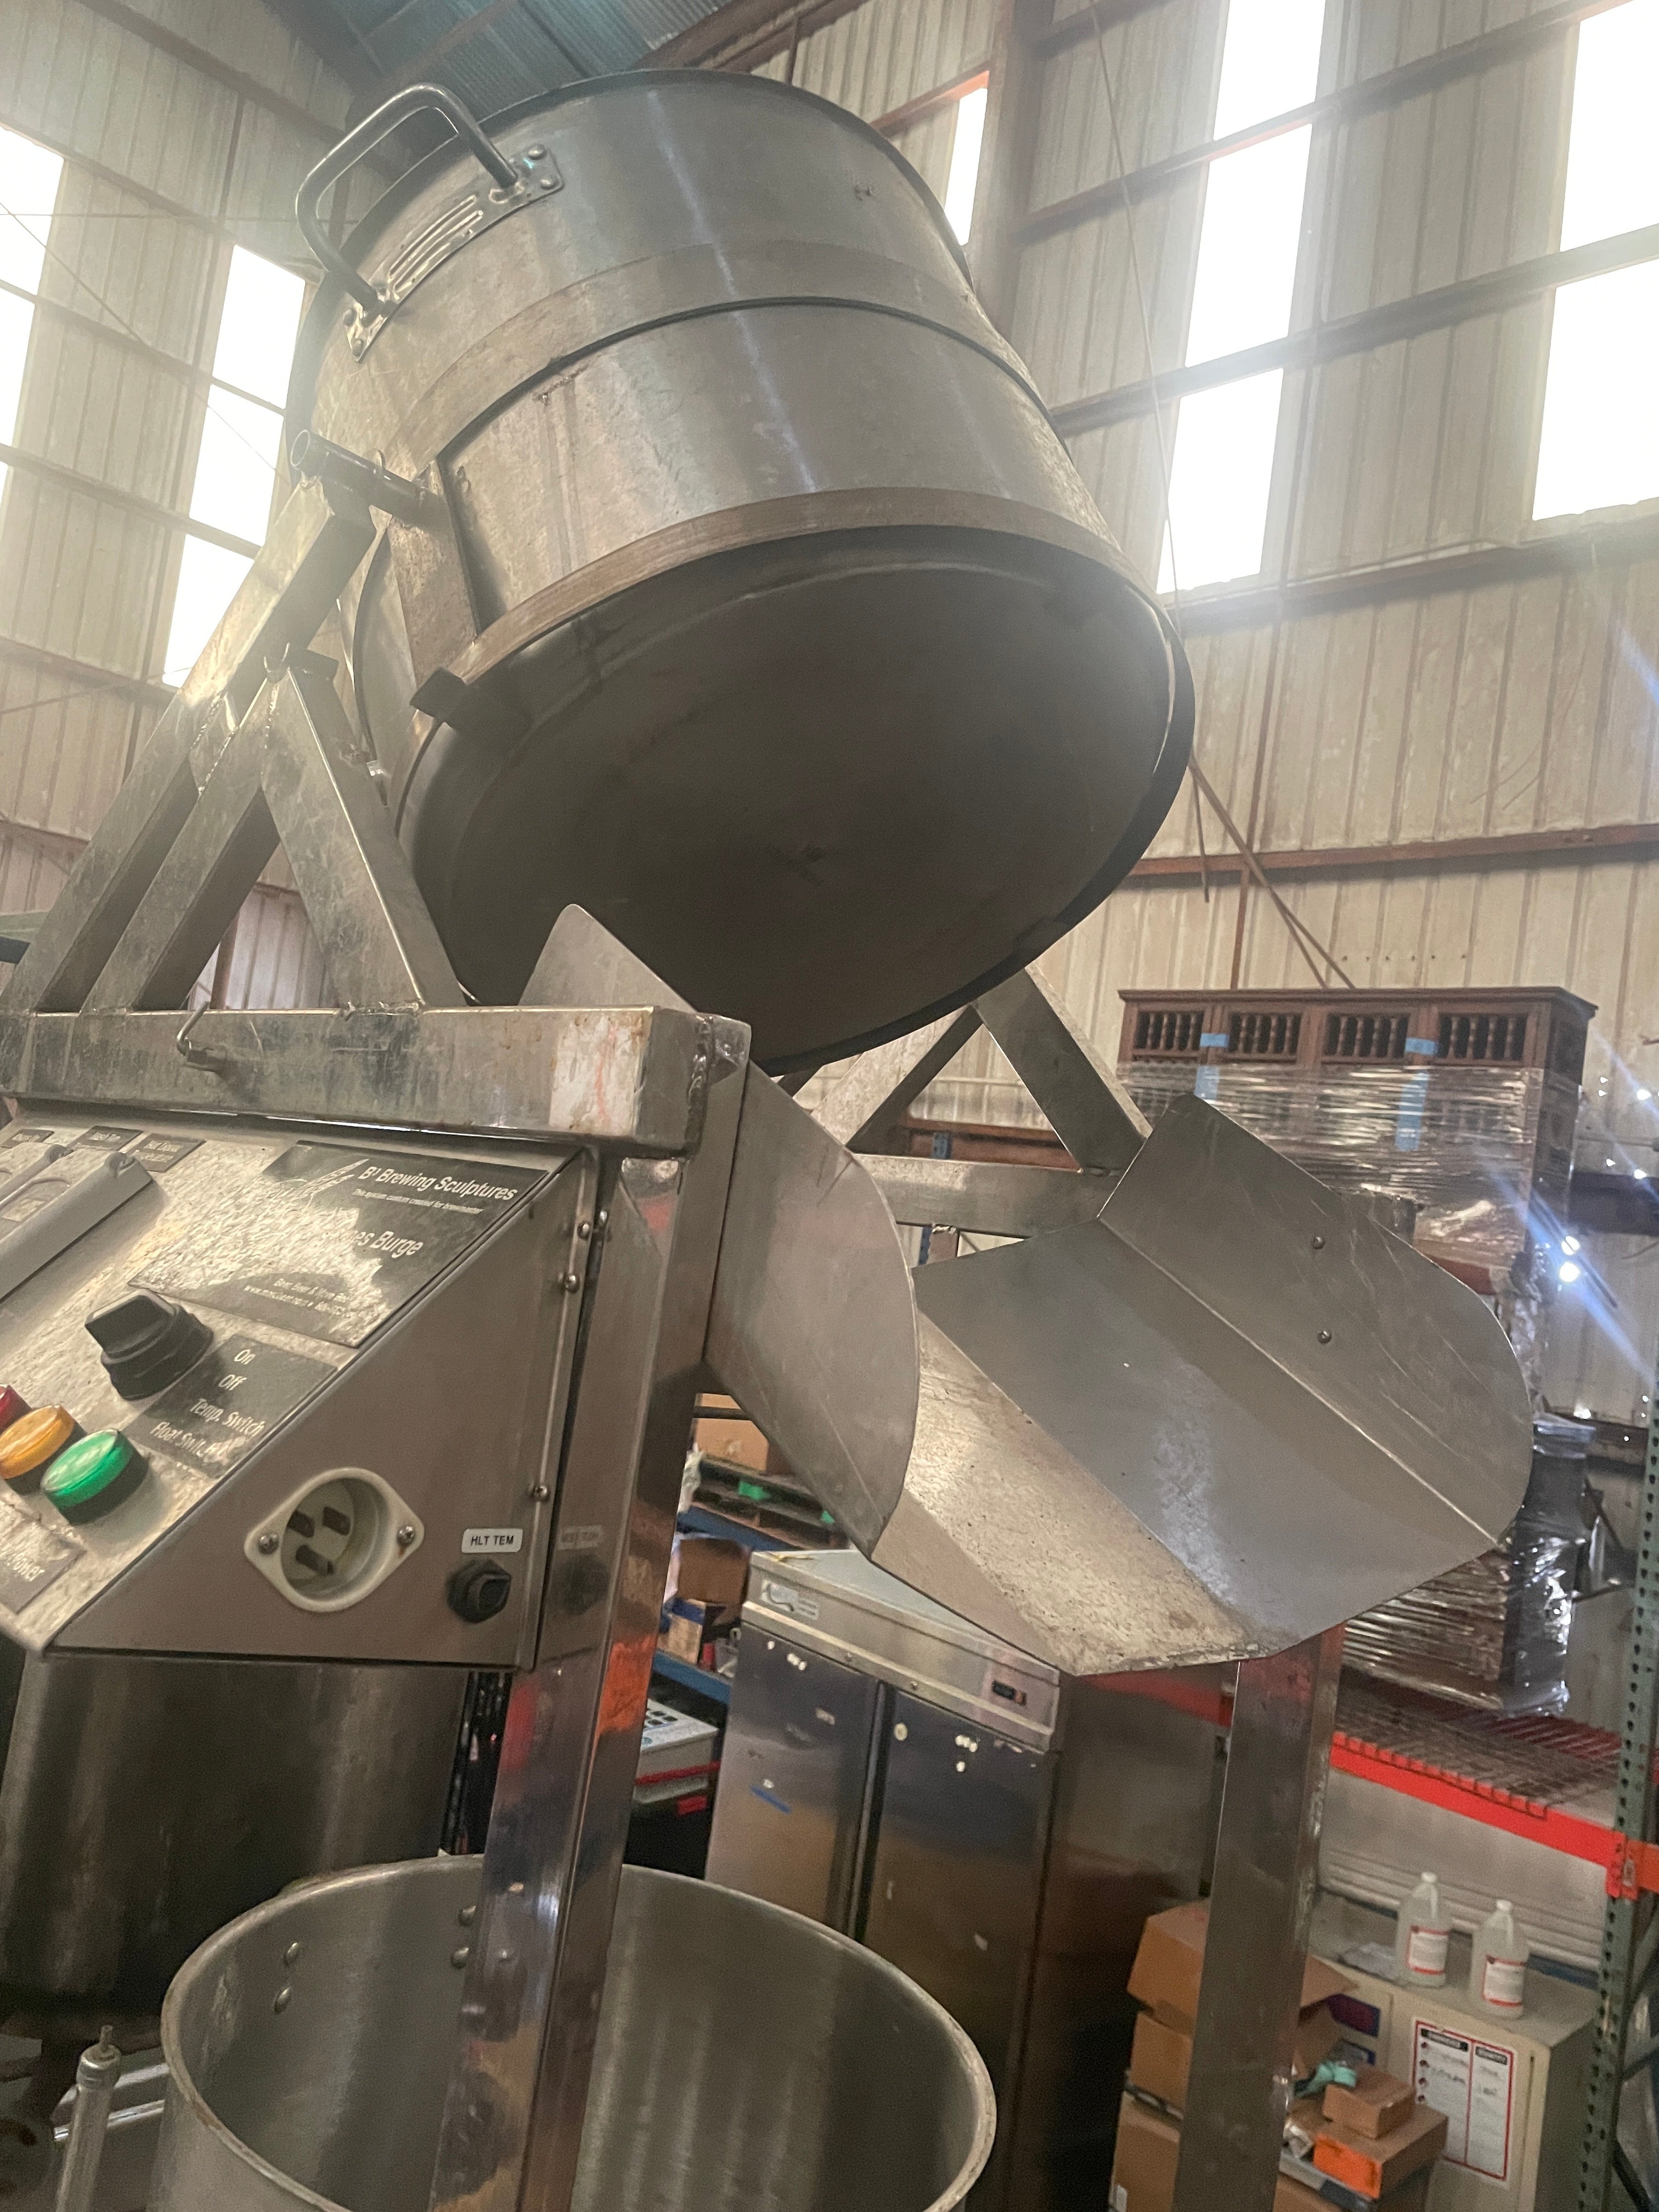 1/2bbl Brewhouse Pilot System